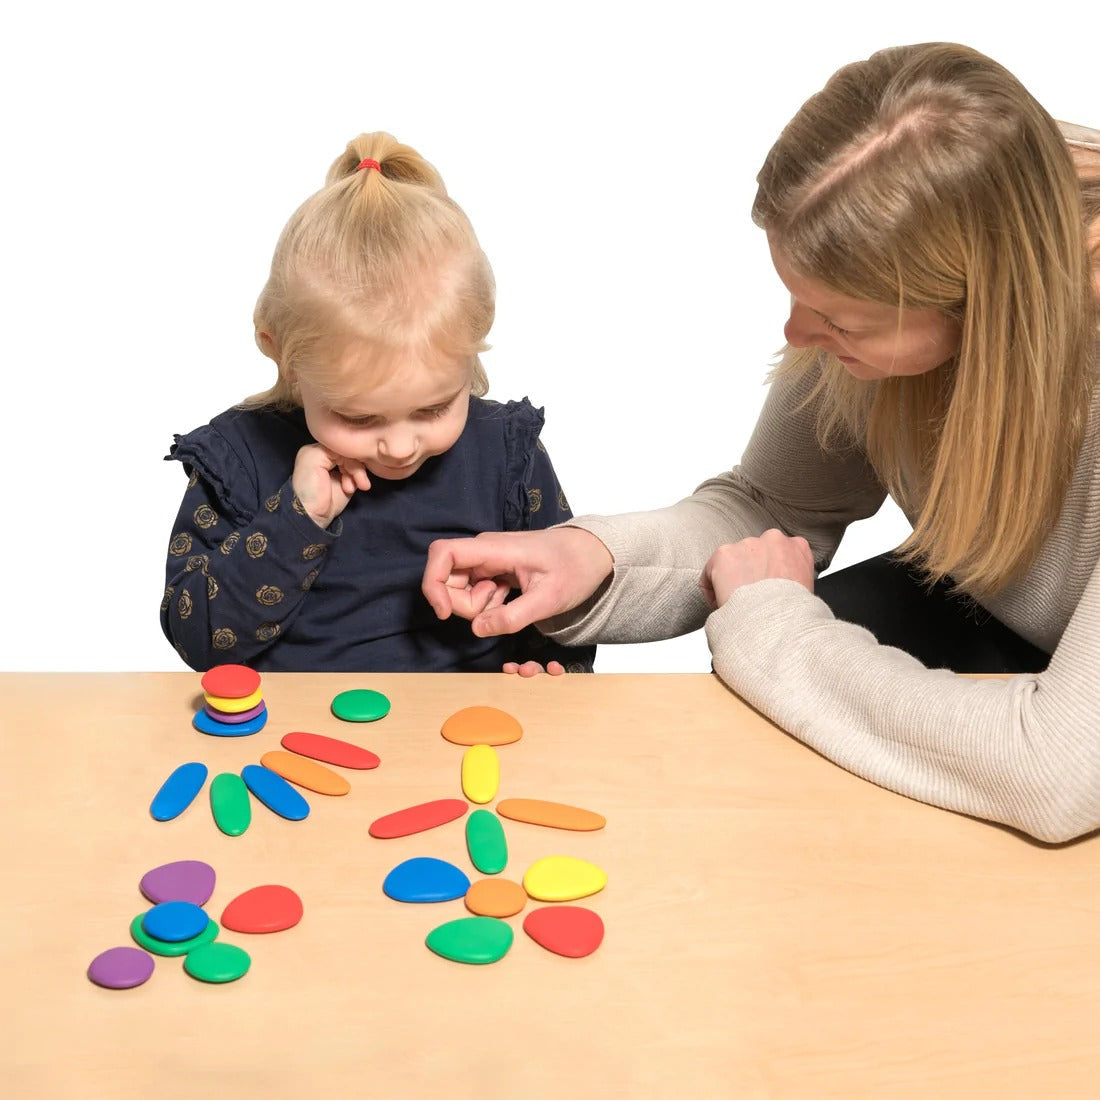 Junior Rainbow Pebbles Activity Set - Pk44, The Junior Rainbow Pebbles® Activity Set is an attractive and appealing resource! In six vibrant colours, the Junior Rainbow Pebbles are a great tool for children to learn about basic counting and sorting, number concept, measurement, balance, creation and promote fine motor skills and more.The Junior Rainbow Pebbles Activity Set supports the following areas of learning: Physical Development - motor skills Personal Development - sensory, collaborative play Underst